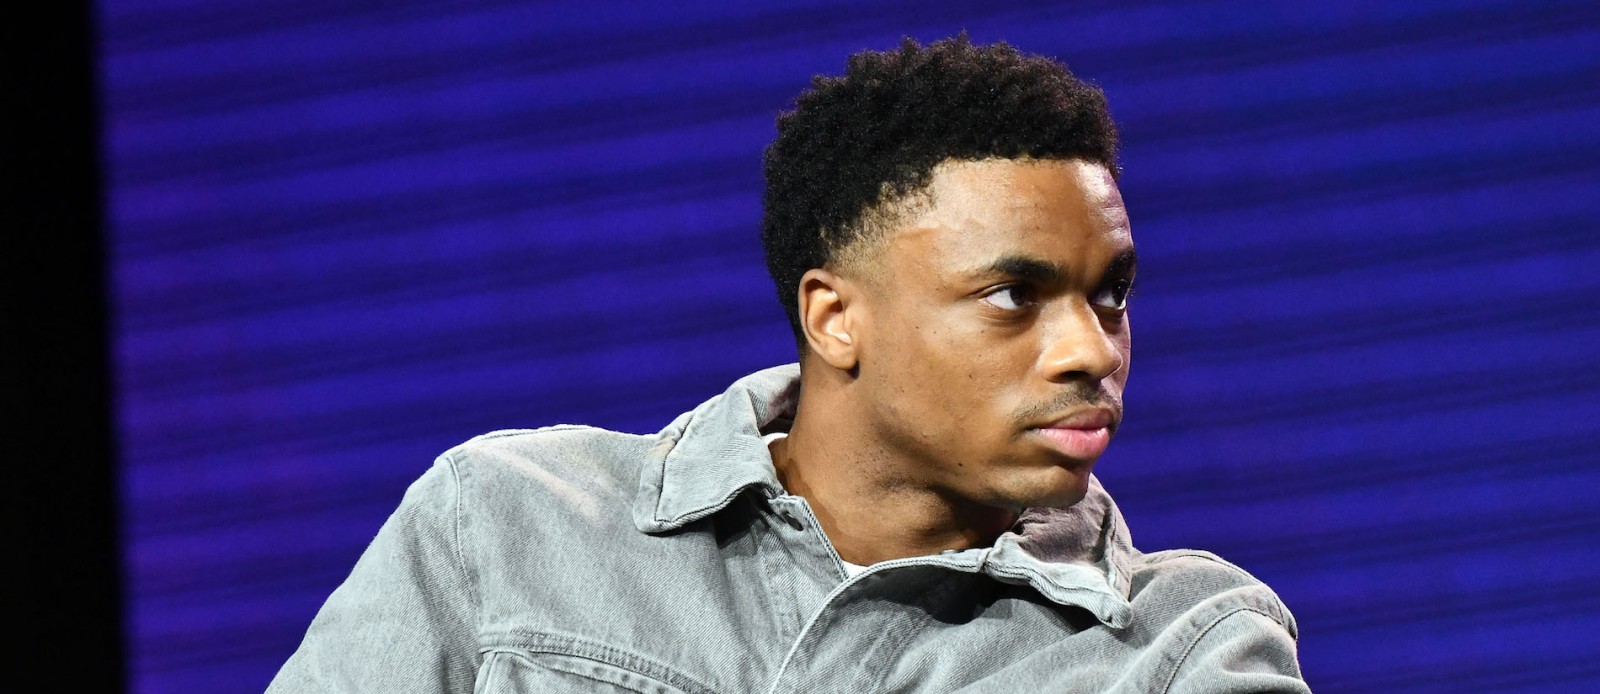 Vince Staples Lands Acting Roles In Reboots Of Both ‘White Men Can’t Jump’ And ‘The Wood’